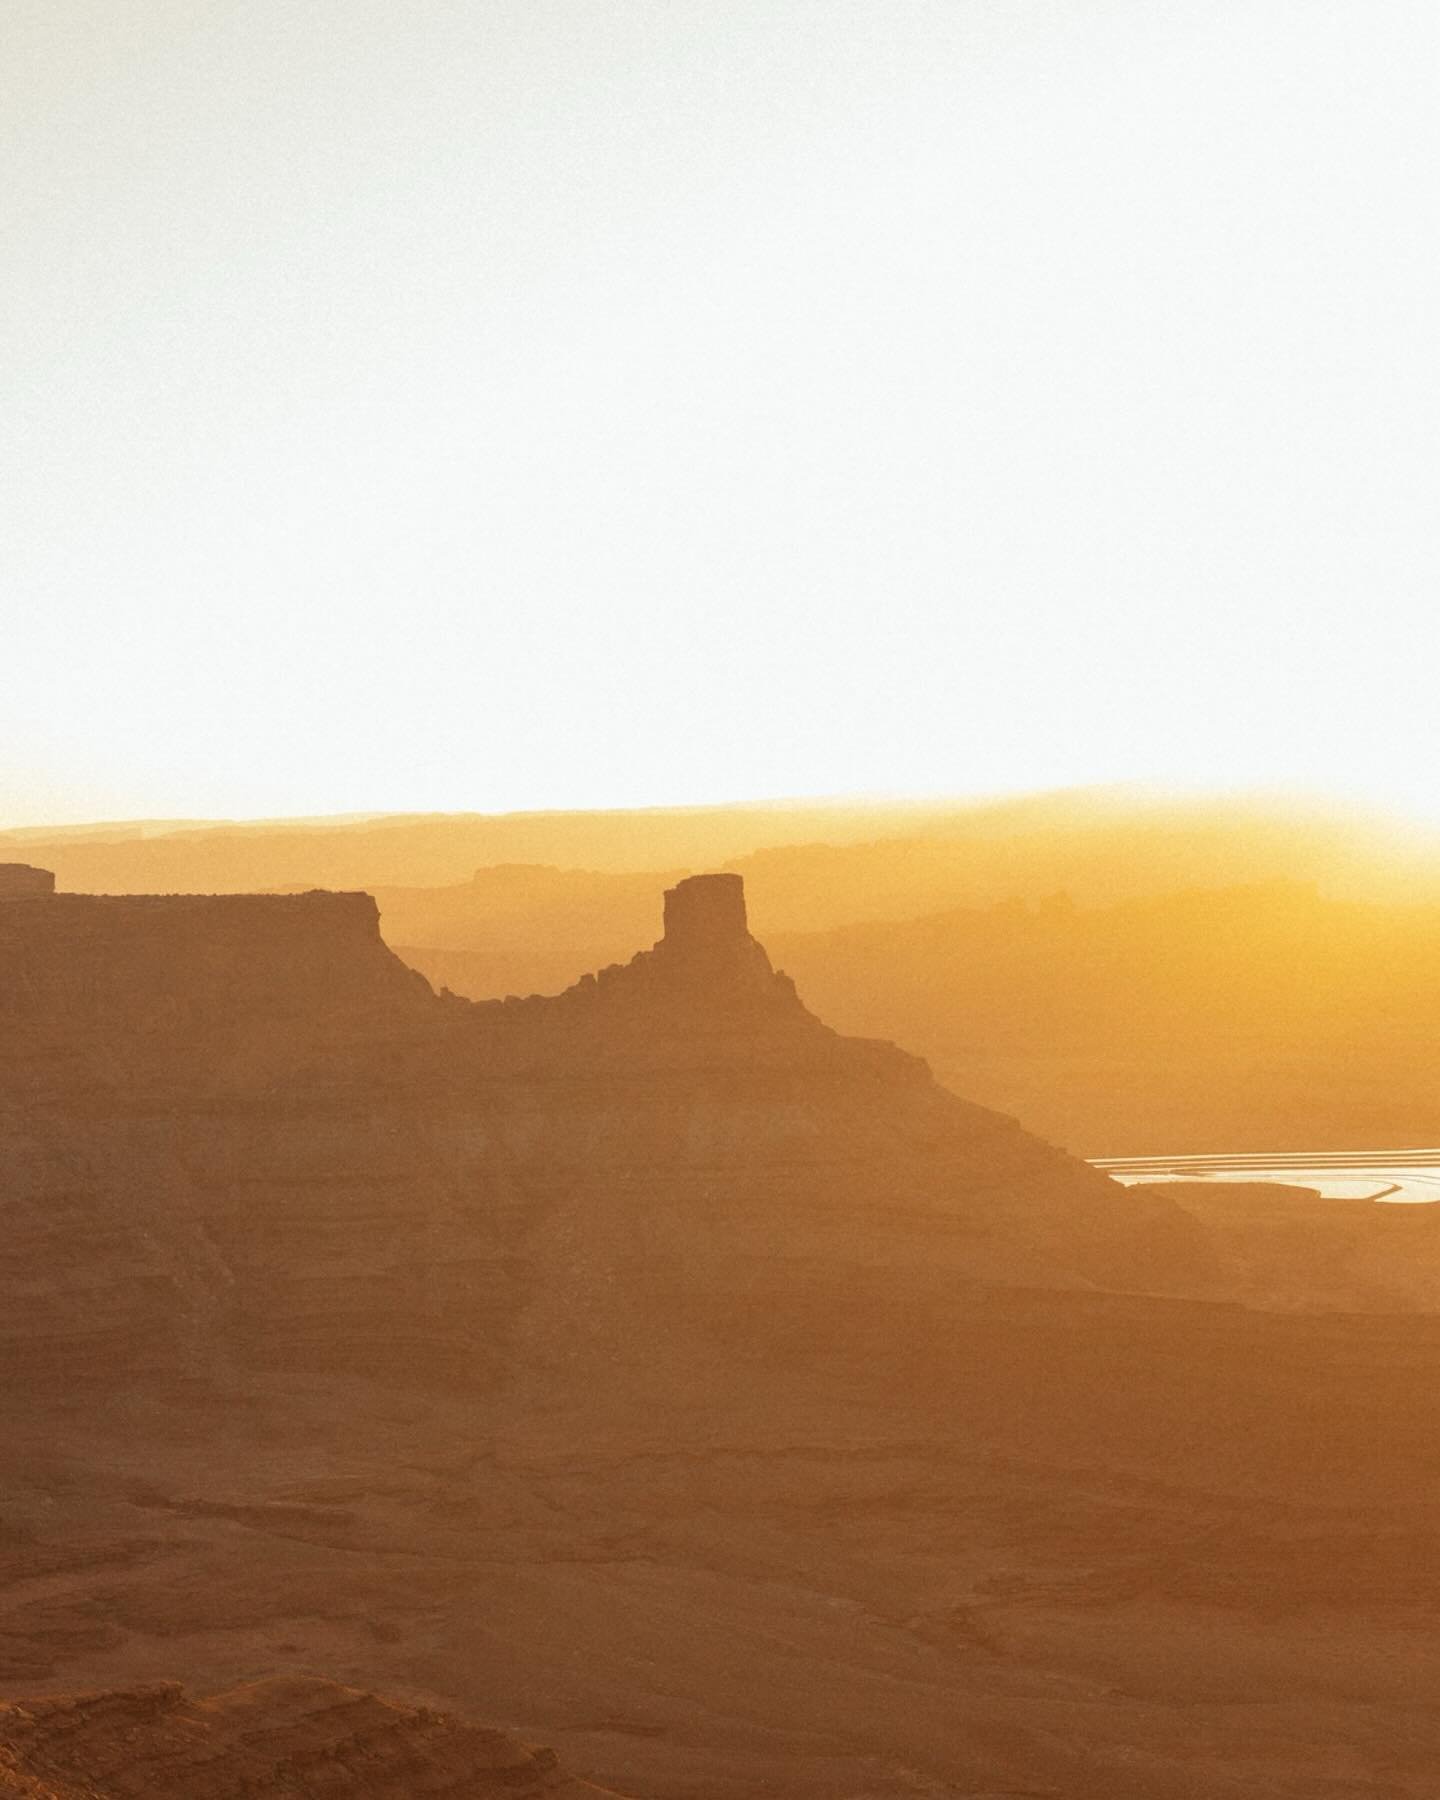 Dead Horse State park is one of my favorite state parks in Utah because it has views similar to the Grand Canyon and HorseShoe Bend, but is less traveled. It also has the most amazing sunrises and sunsets I have ever seen! 🌅 

Dogs can also be on a 